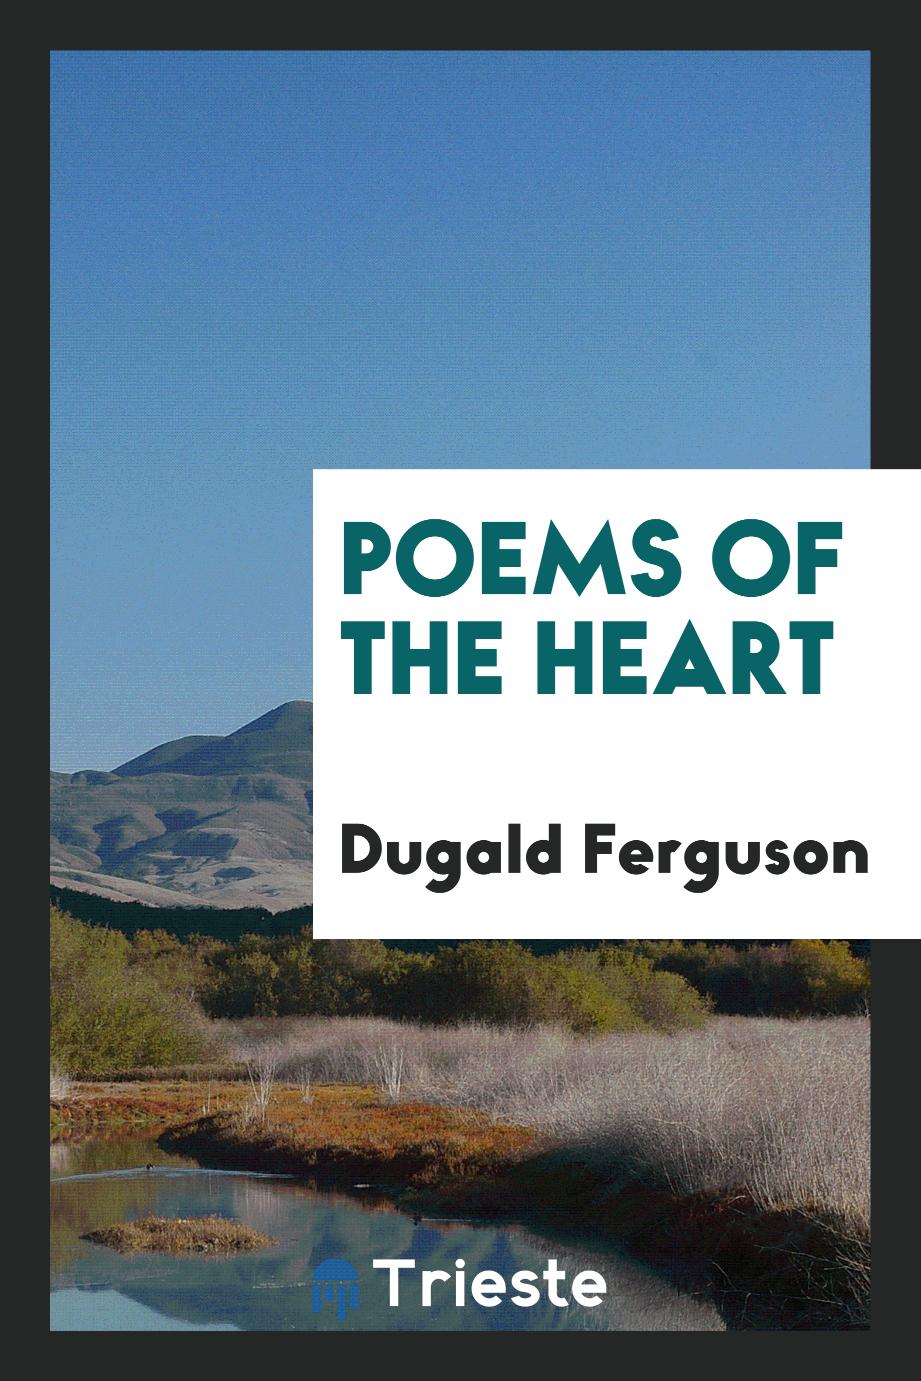 Poems of the heart